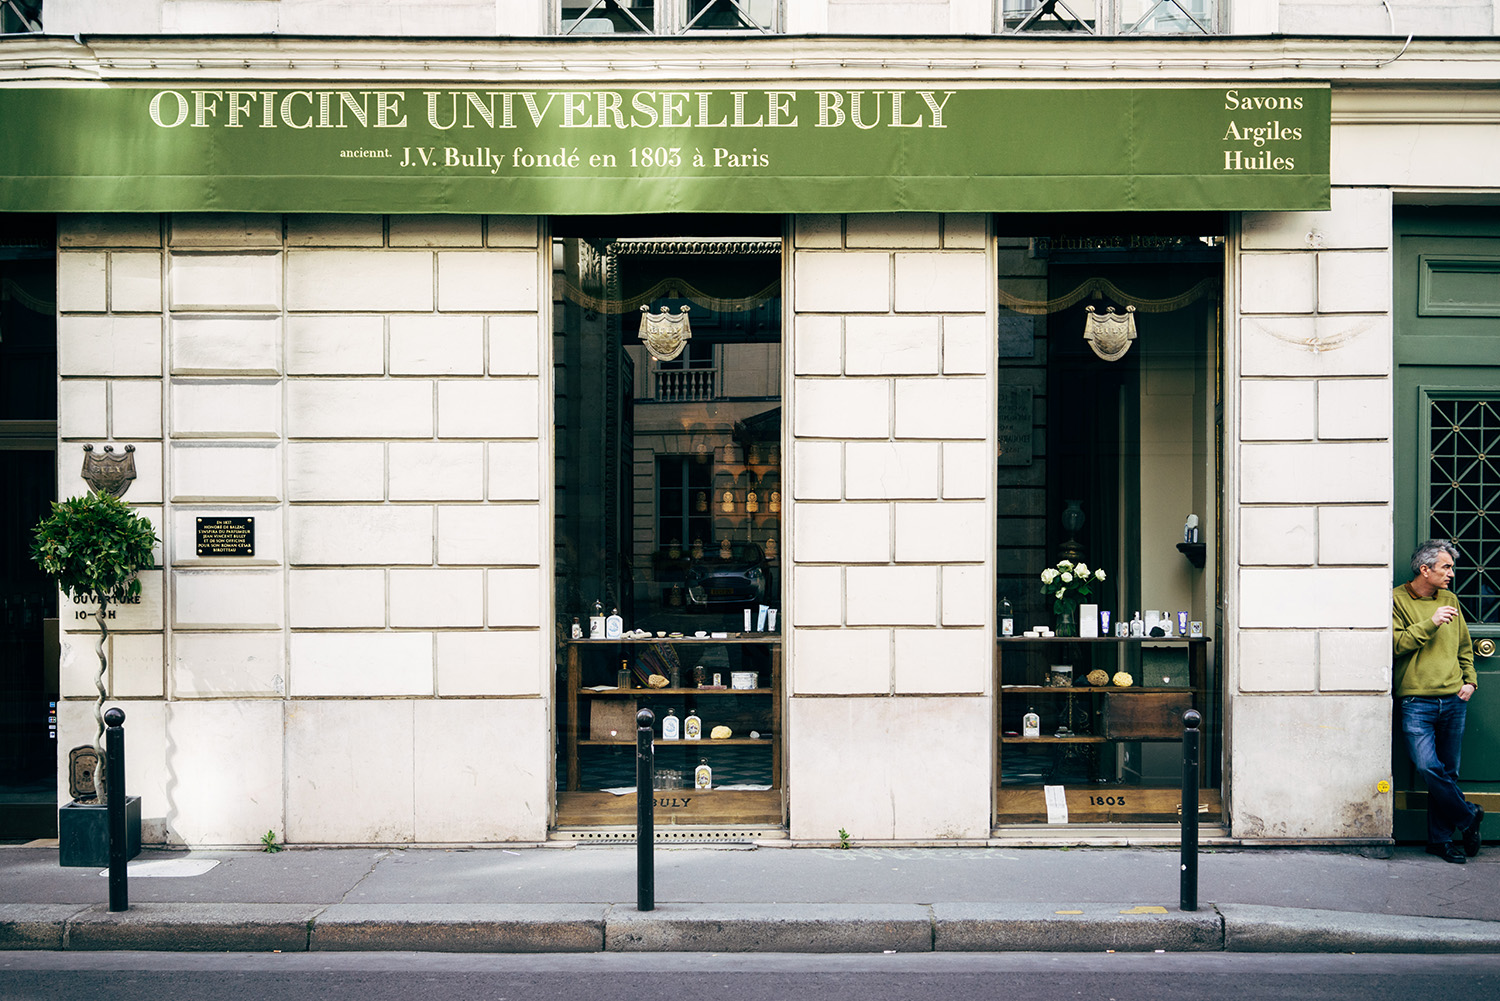 1,030 Likes, 4 Comments - Officine Universelle Buly 1803